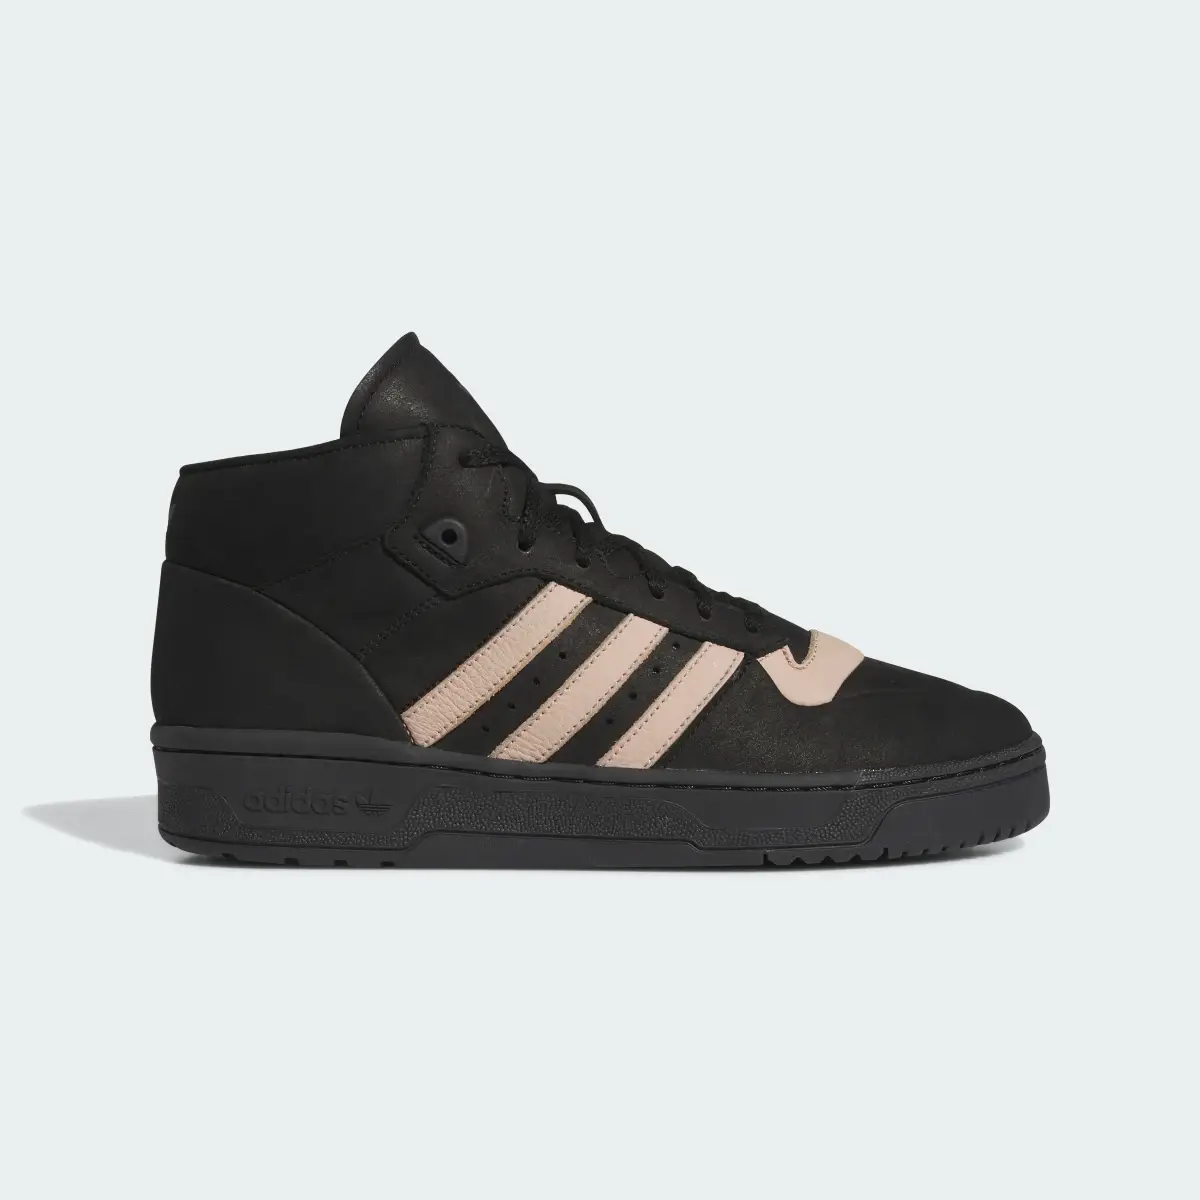 Adidas Rivalry Mid 001 Shoes. 2